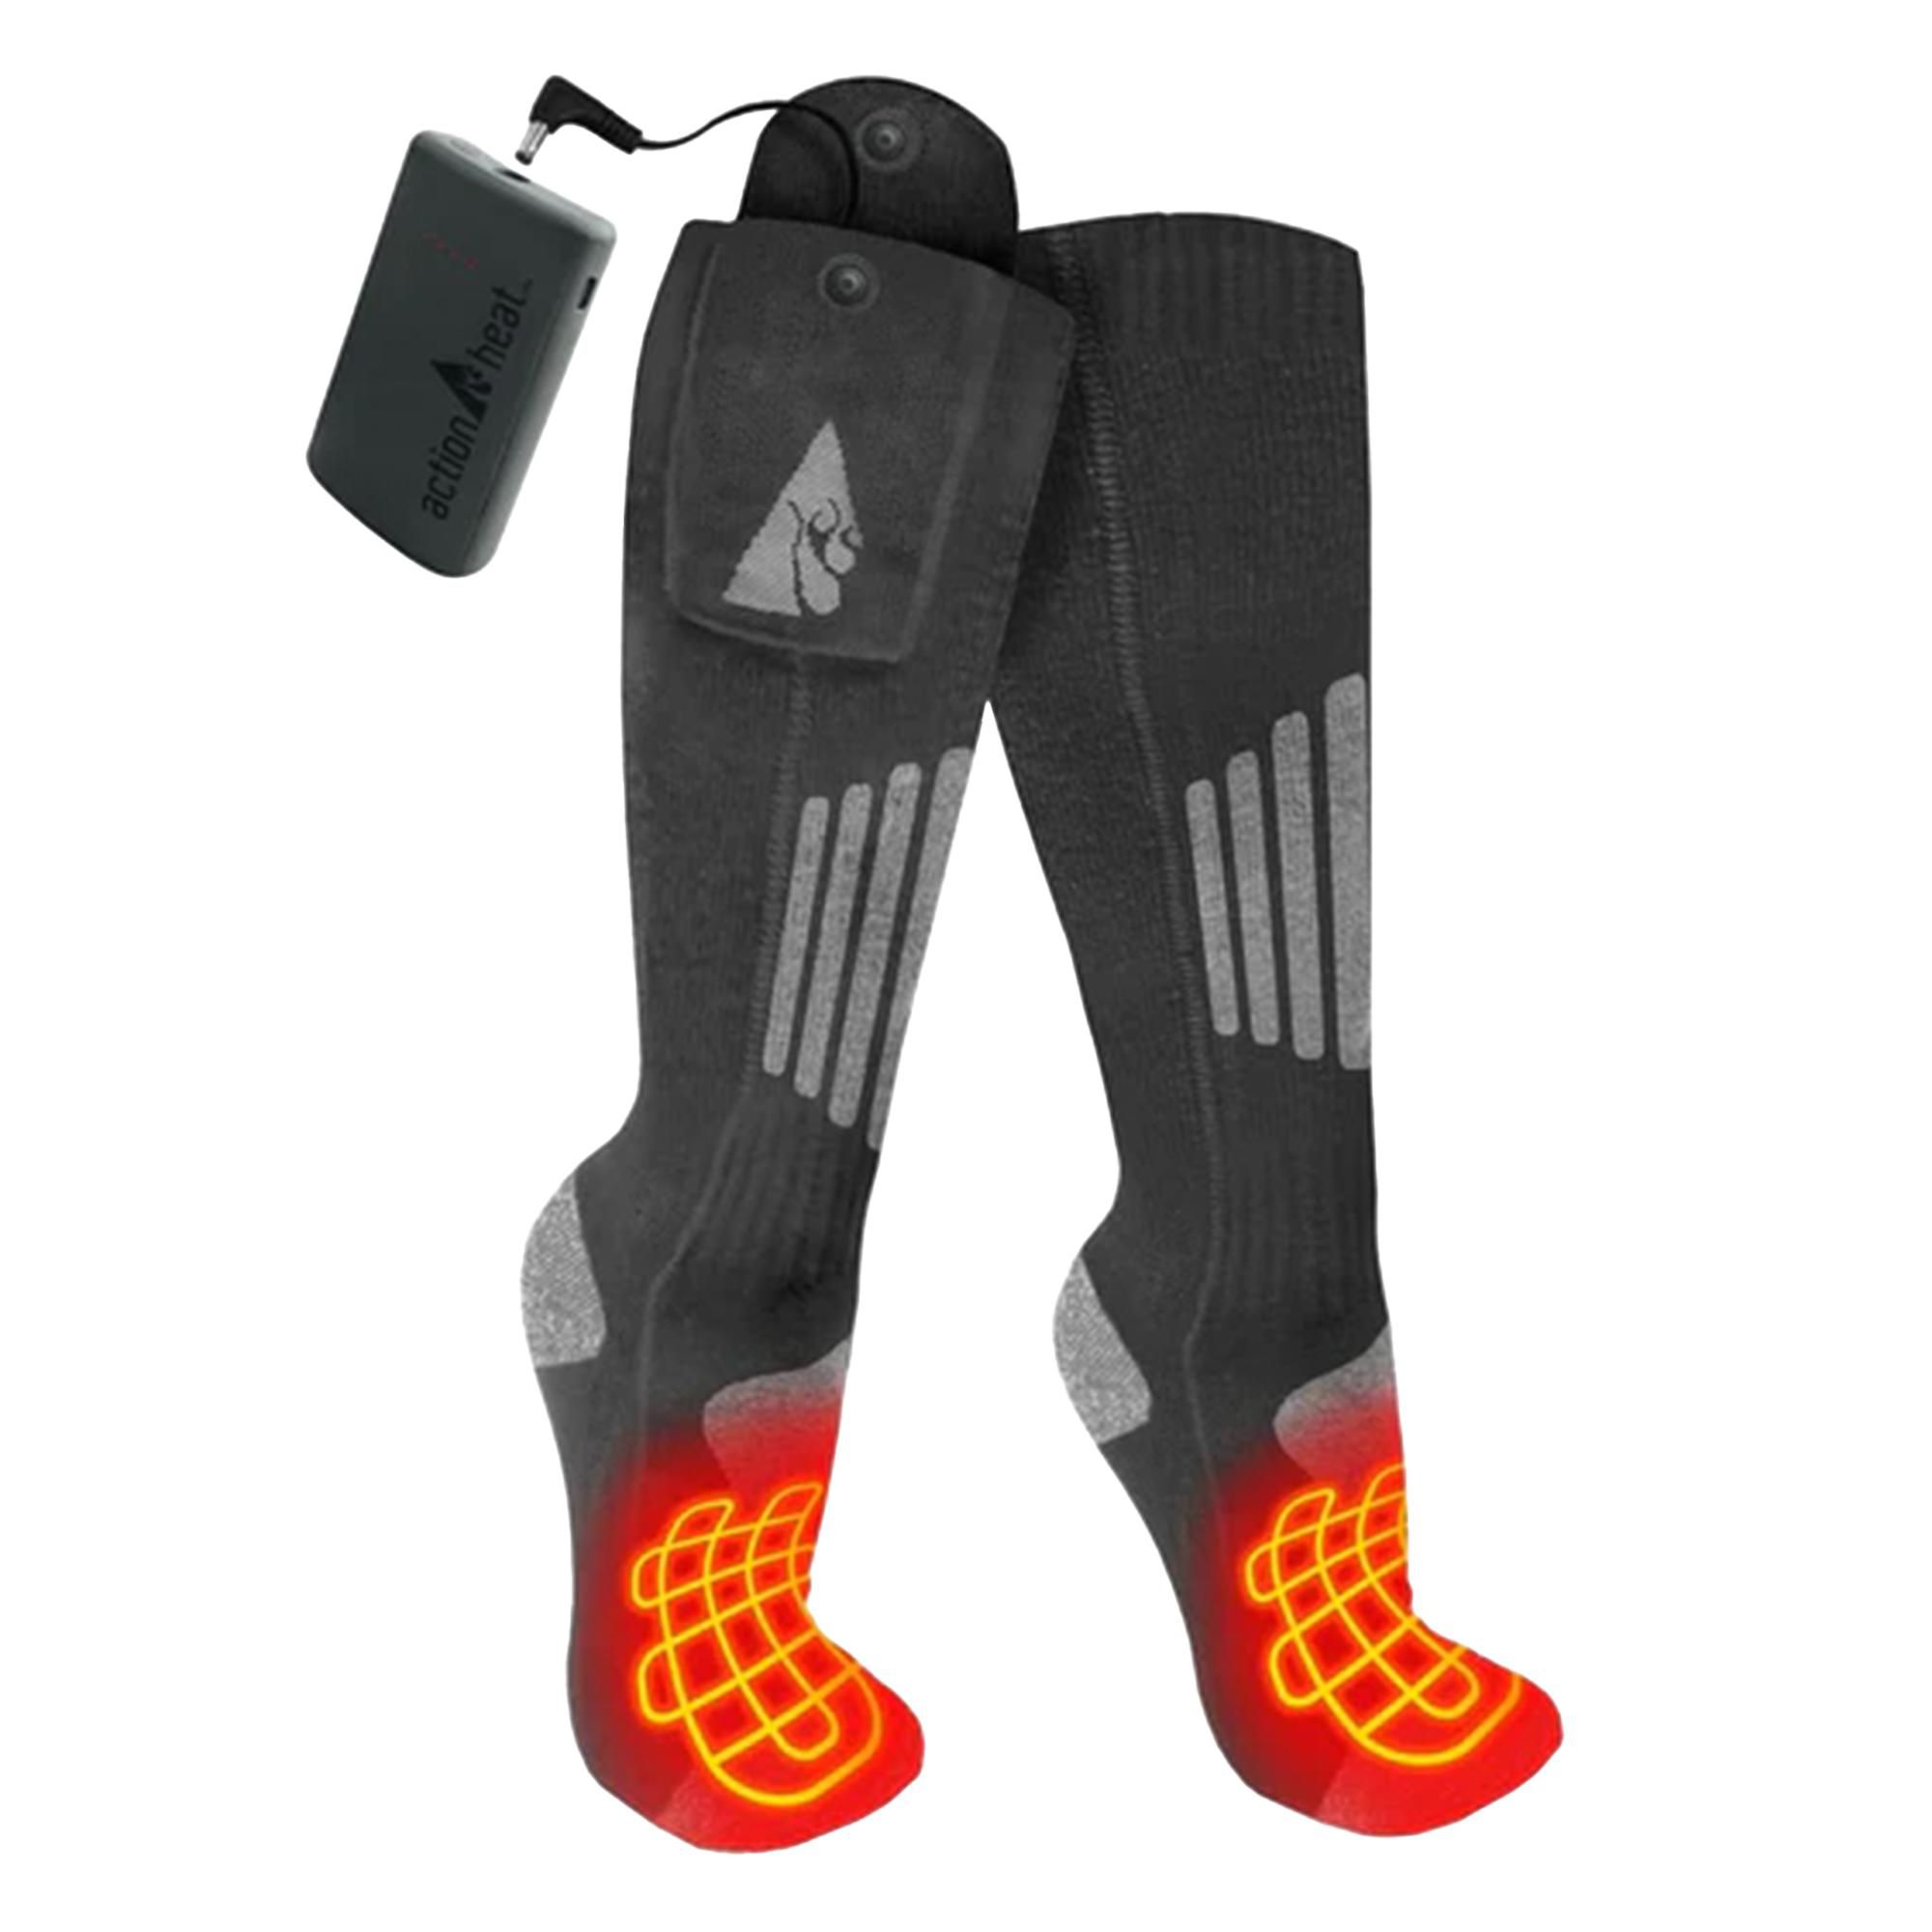 Rechargeable Heated Socks